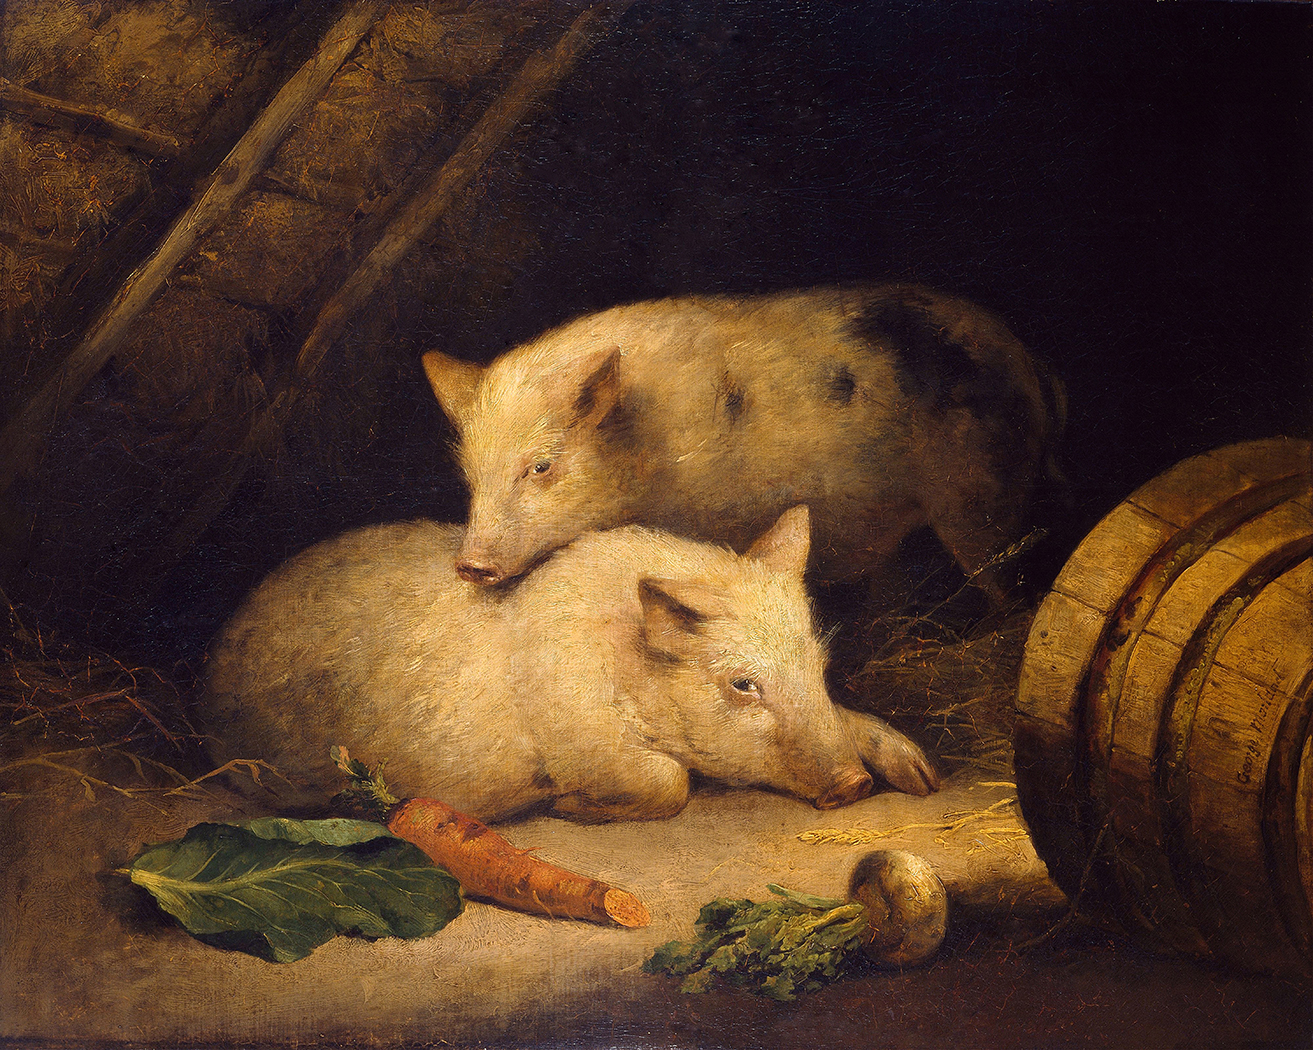 Farm/Pastoral Farm Two Pigs Framed Oil Painting Print on  ...